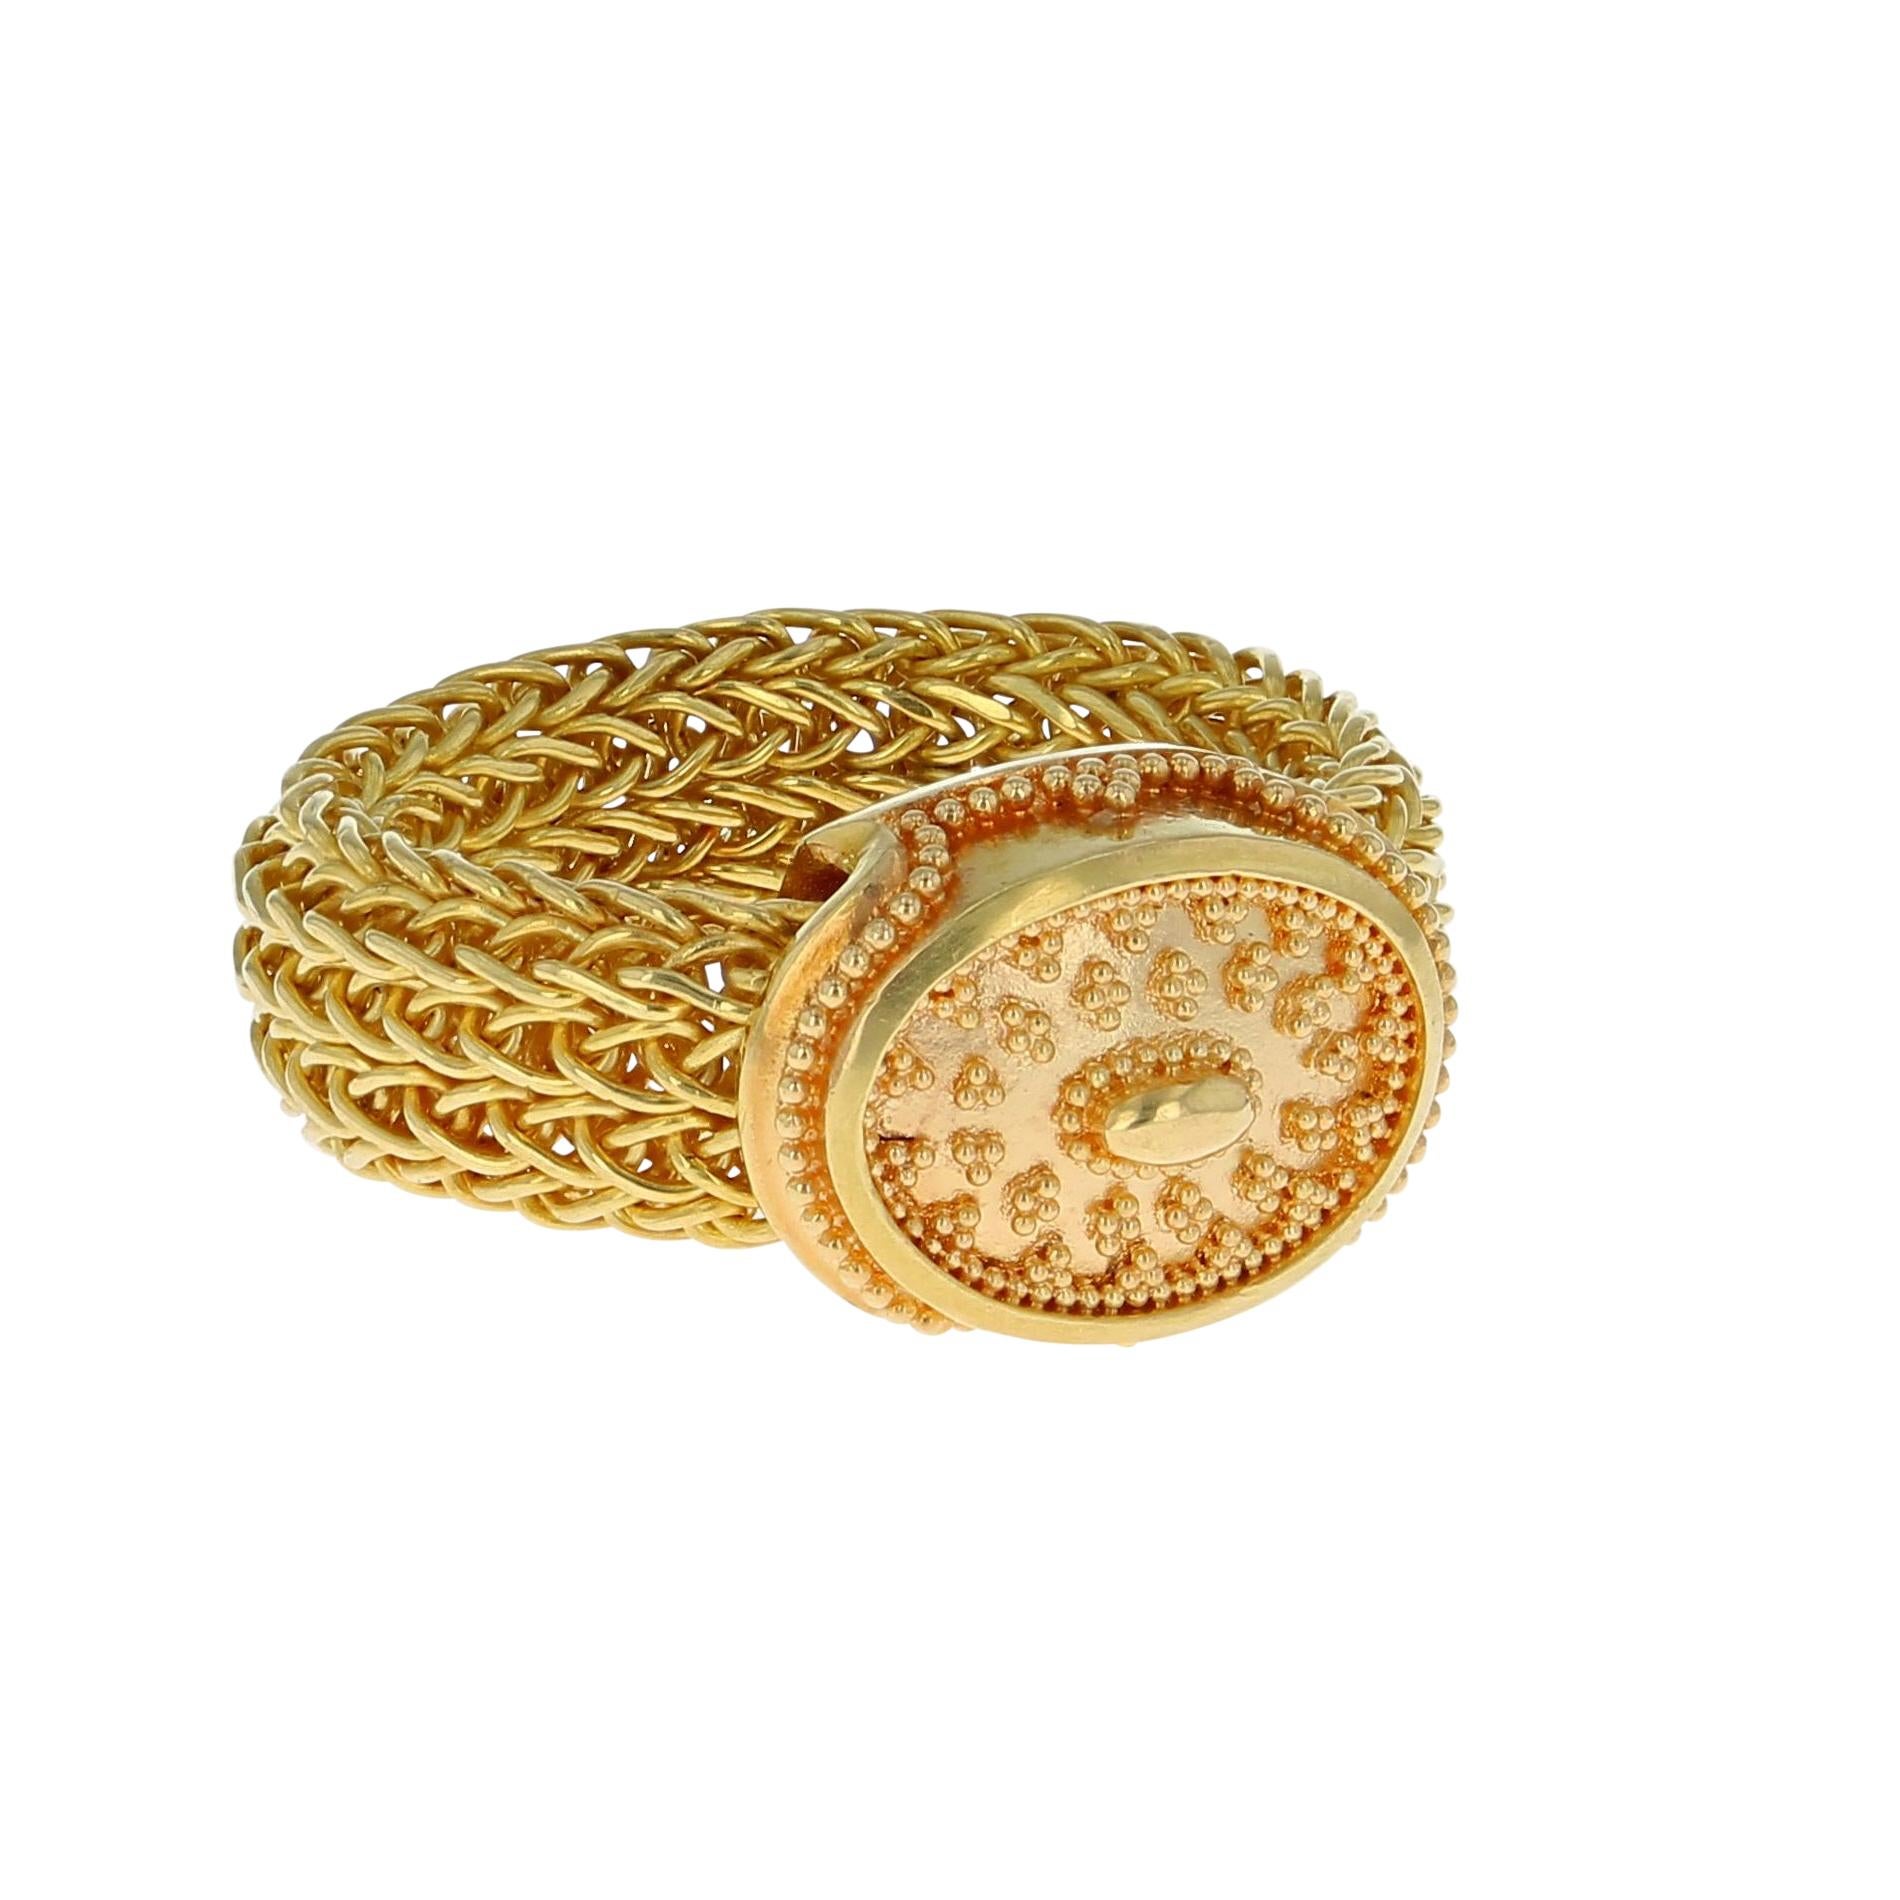 A unique ring from the Kent Raible 'Studio Collection'! This ring features the Raible classic gold granulation, but uses a flexible mesh, hand woven chain band!

Unlike much “designer” jewelry made today, all jewelry work is done under Kent's direct